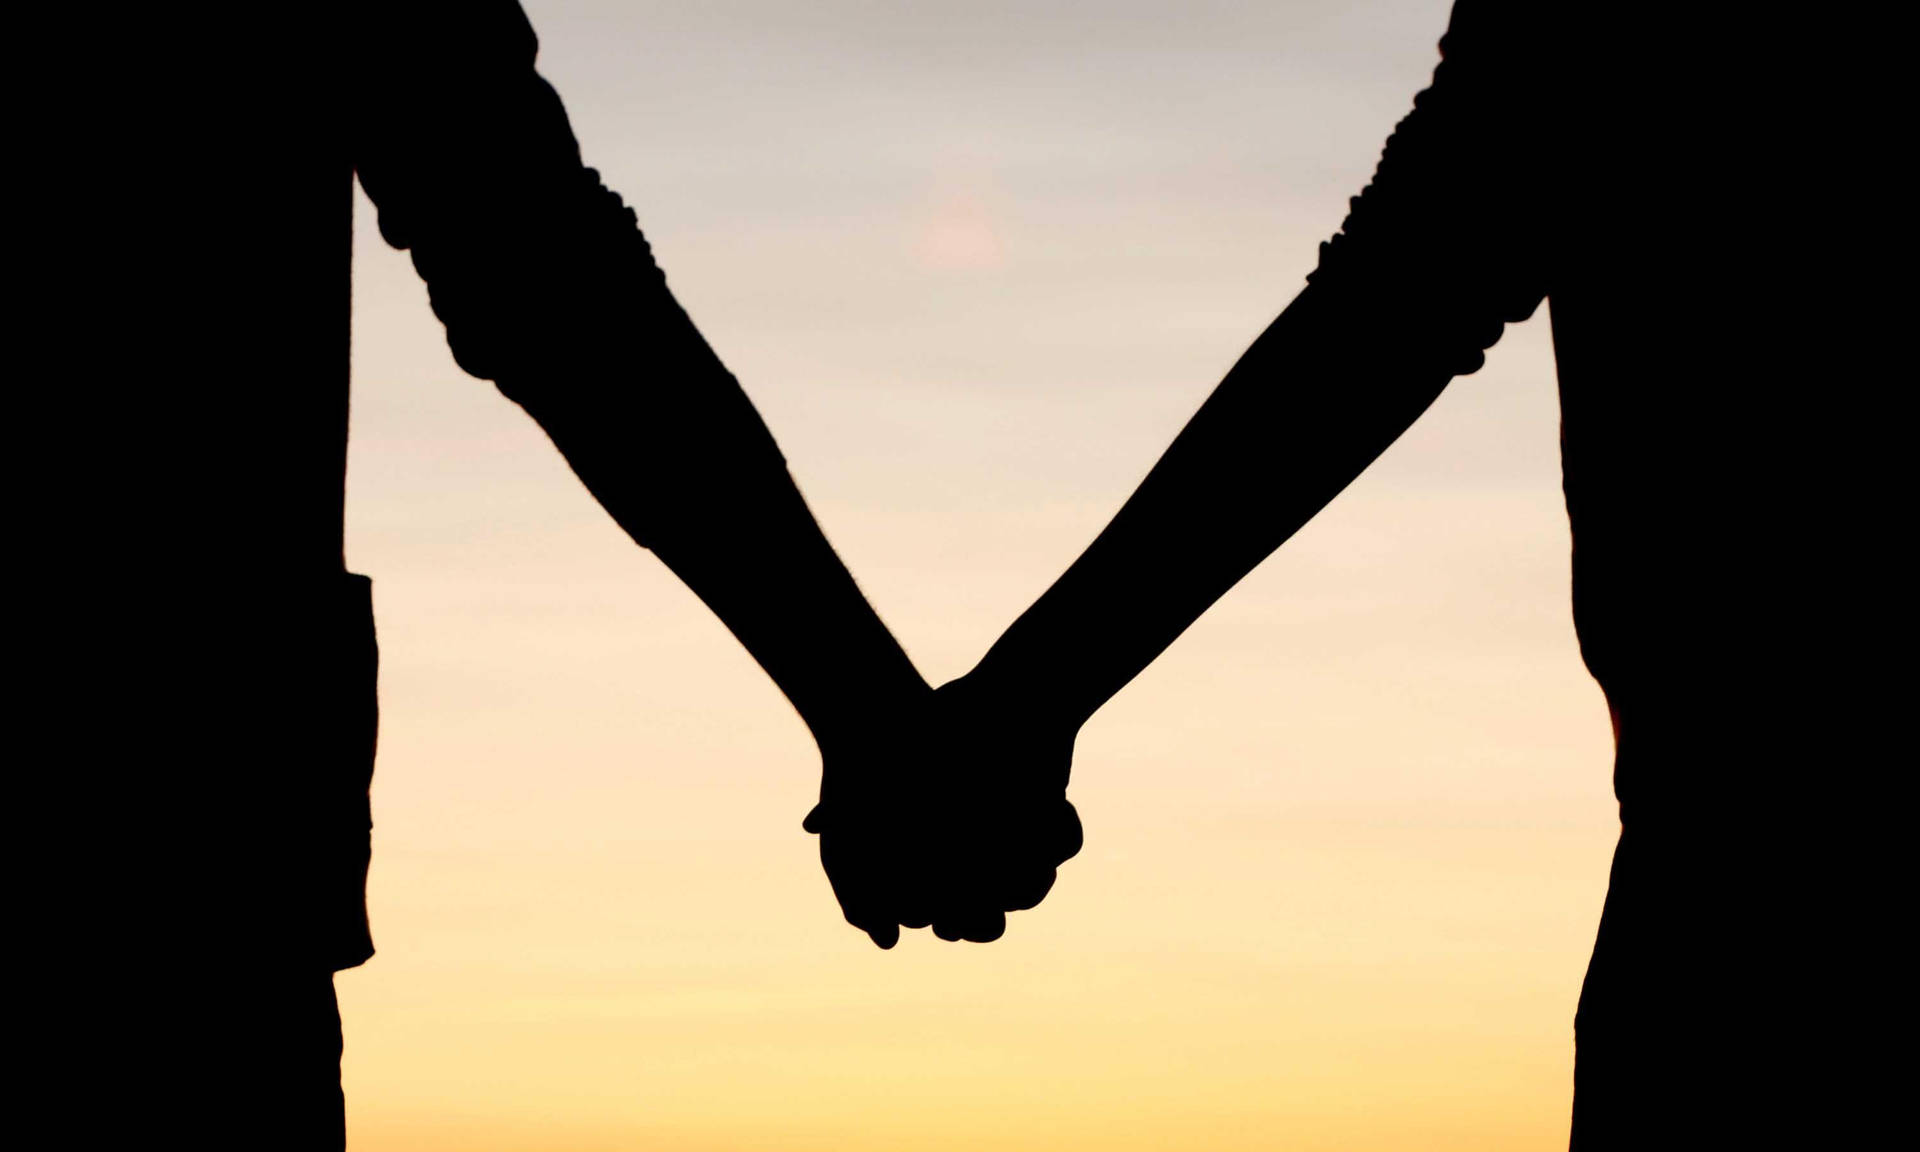 Couple Holding Hands Silhouette Sunset Sky Background